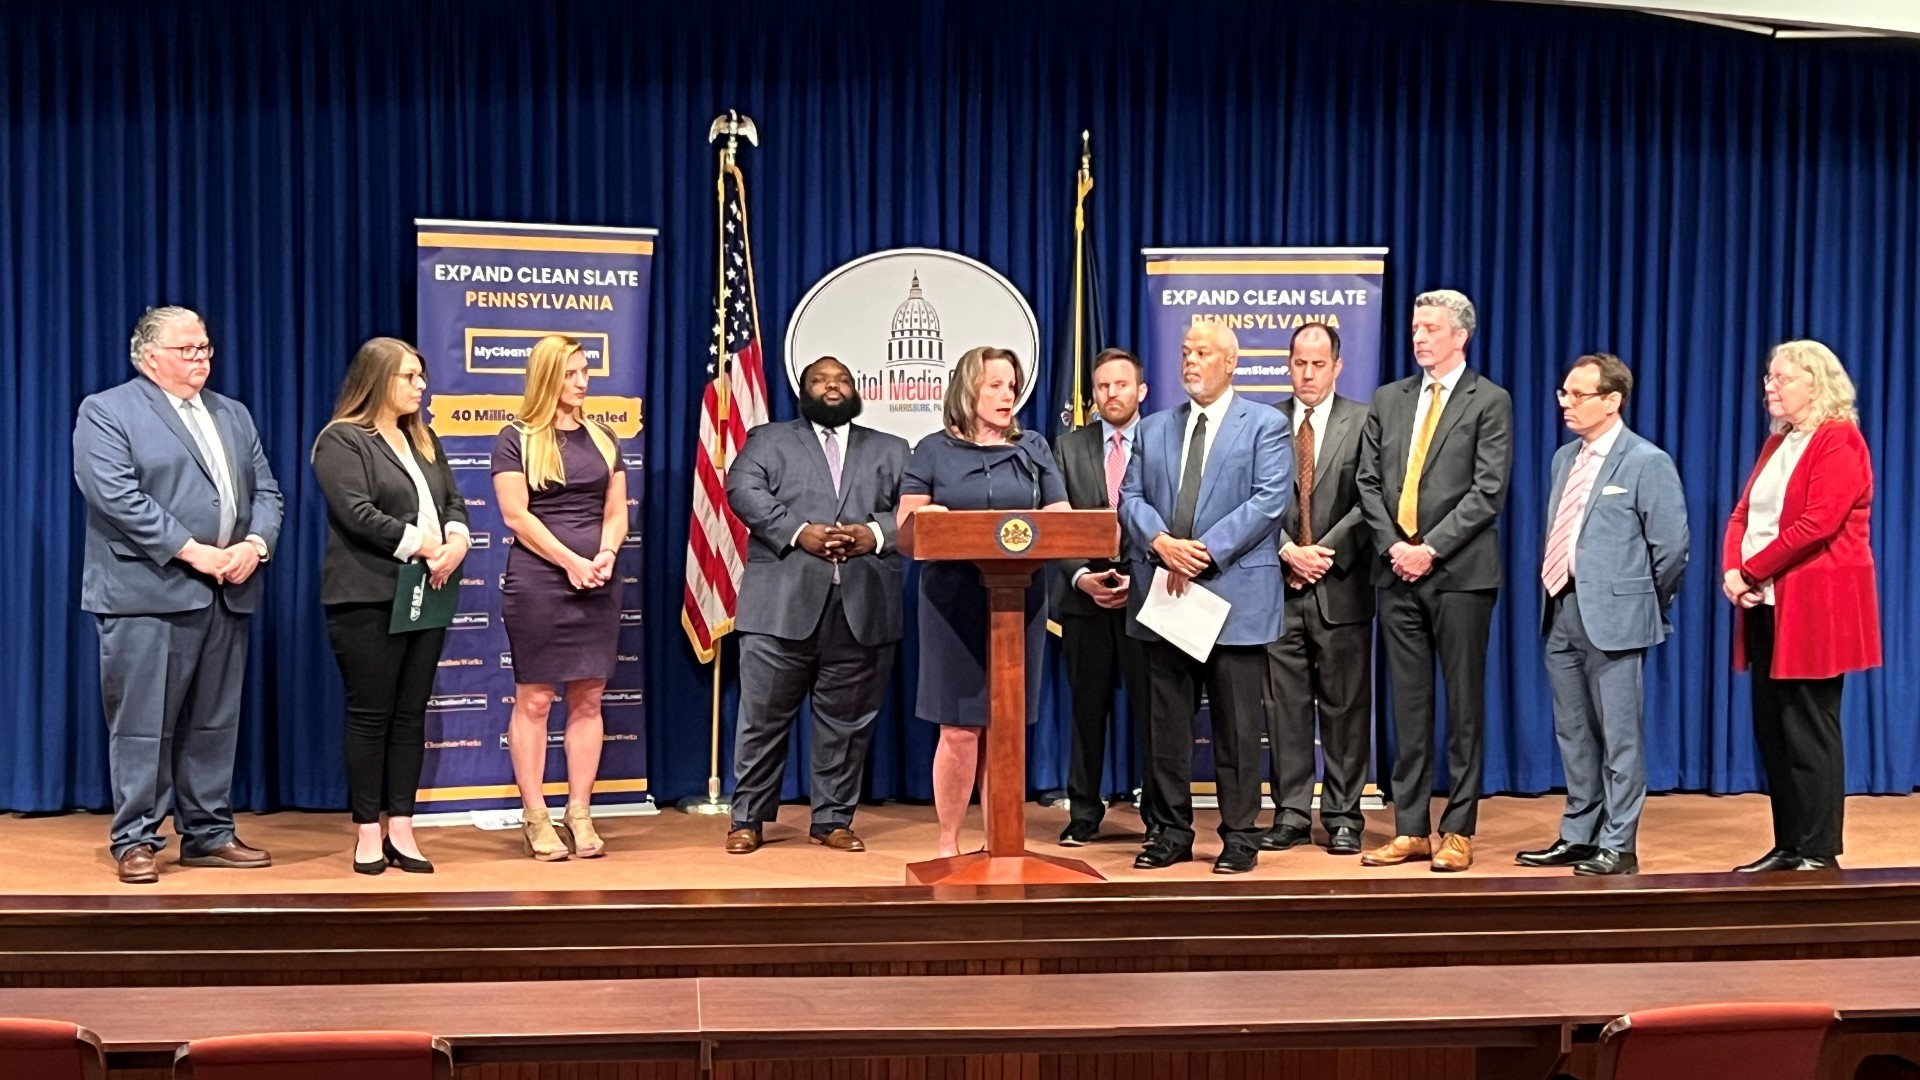 Pennsylvania could soon give people who served time for non-violent felony crimes a second chance. A new bi-partisan bill would wipe some criminal records clean.